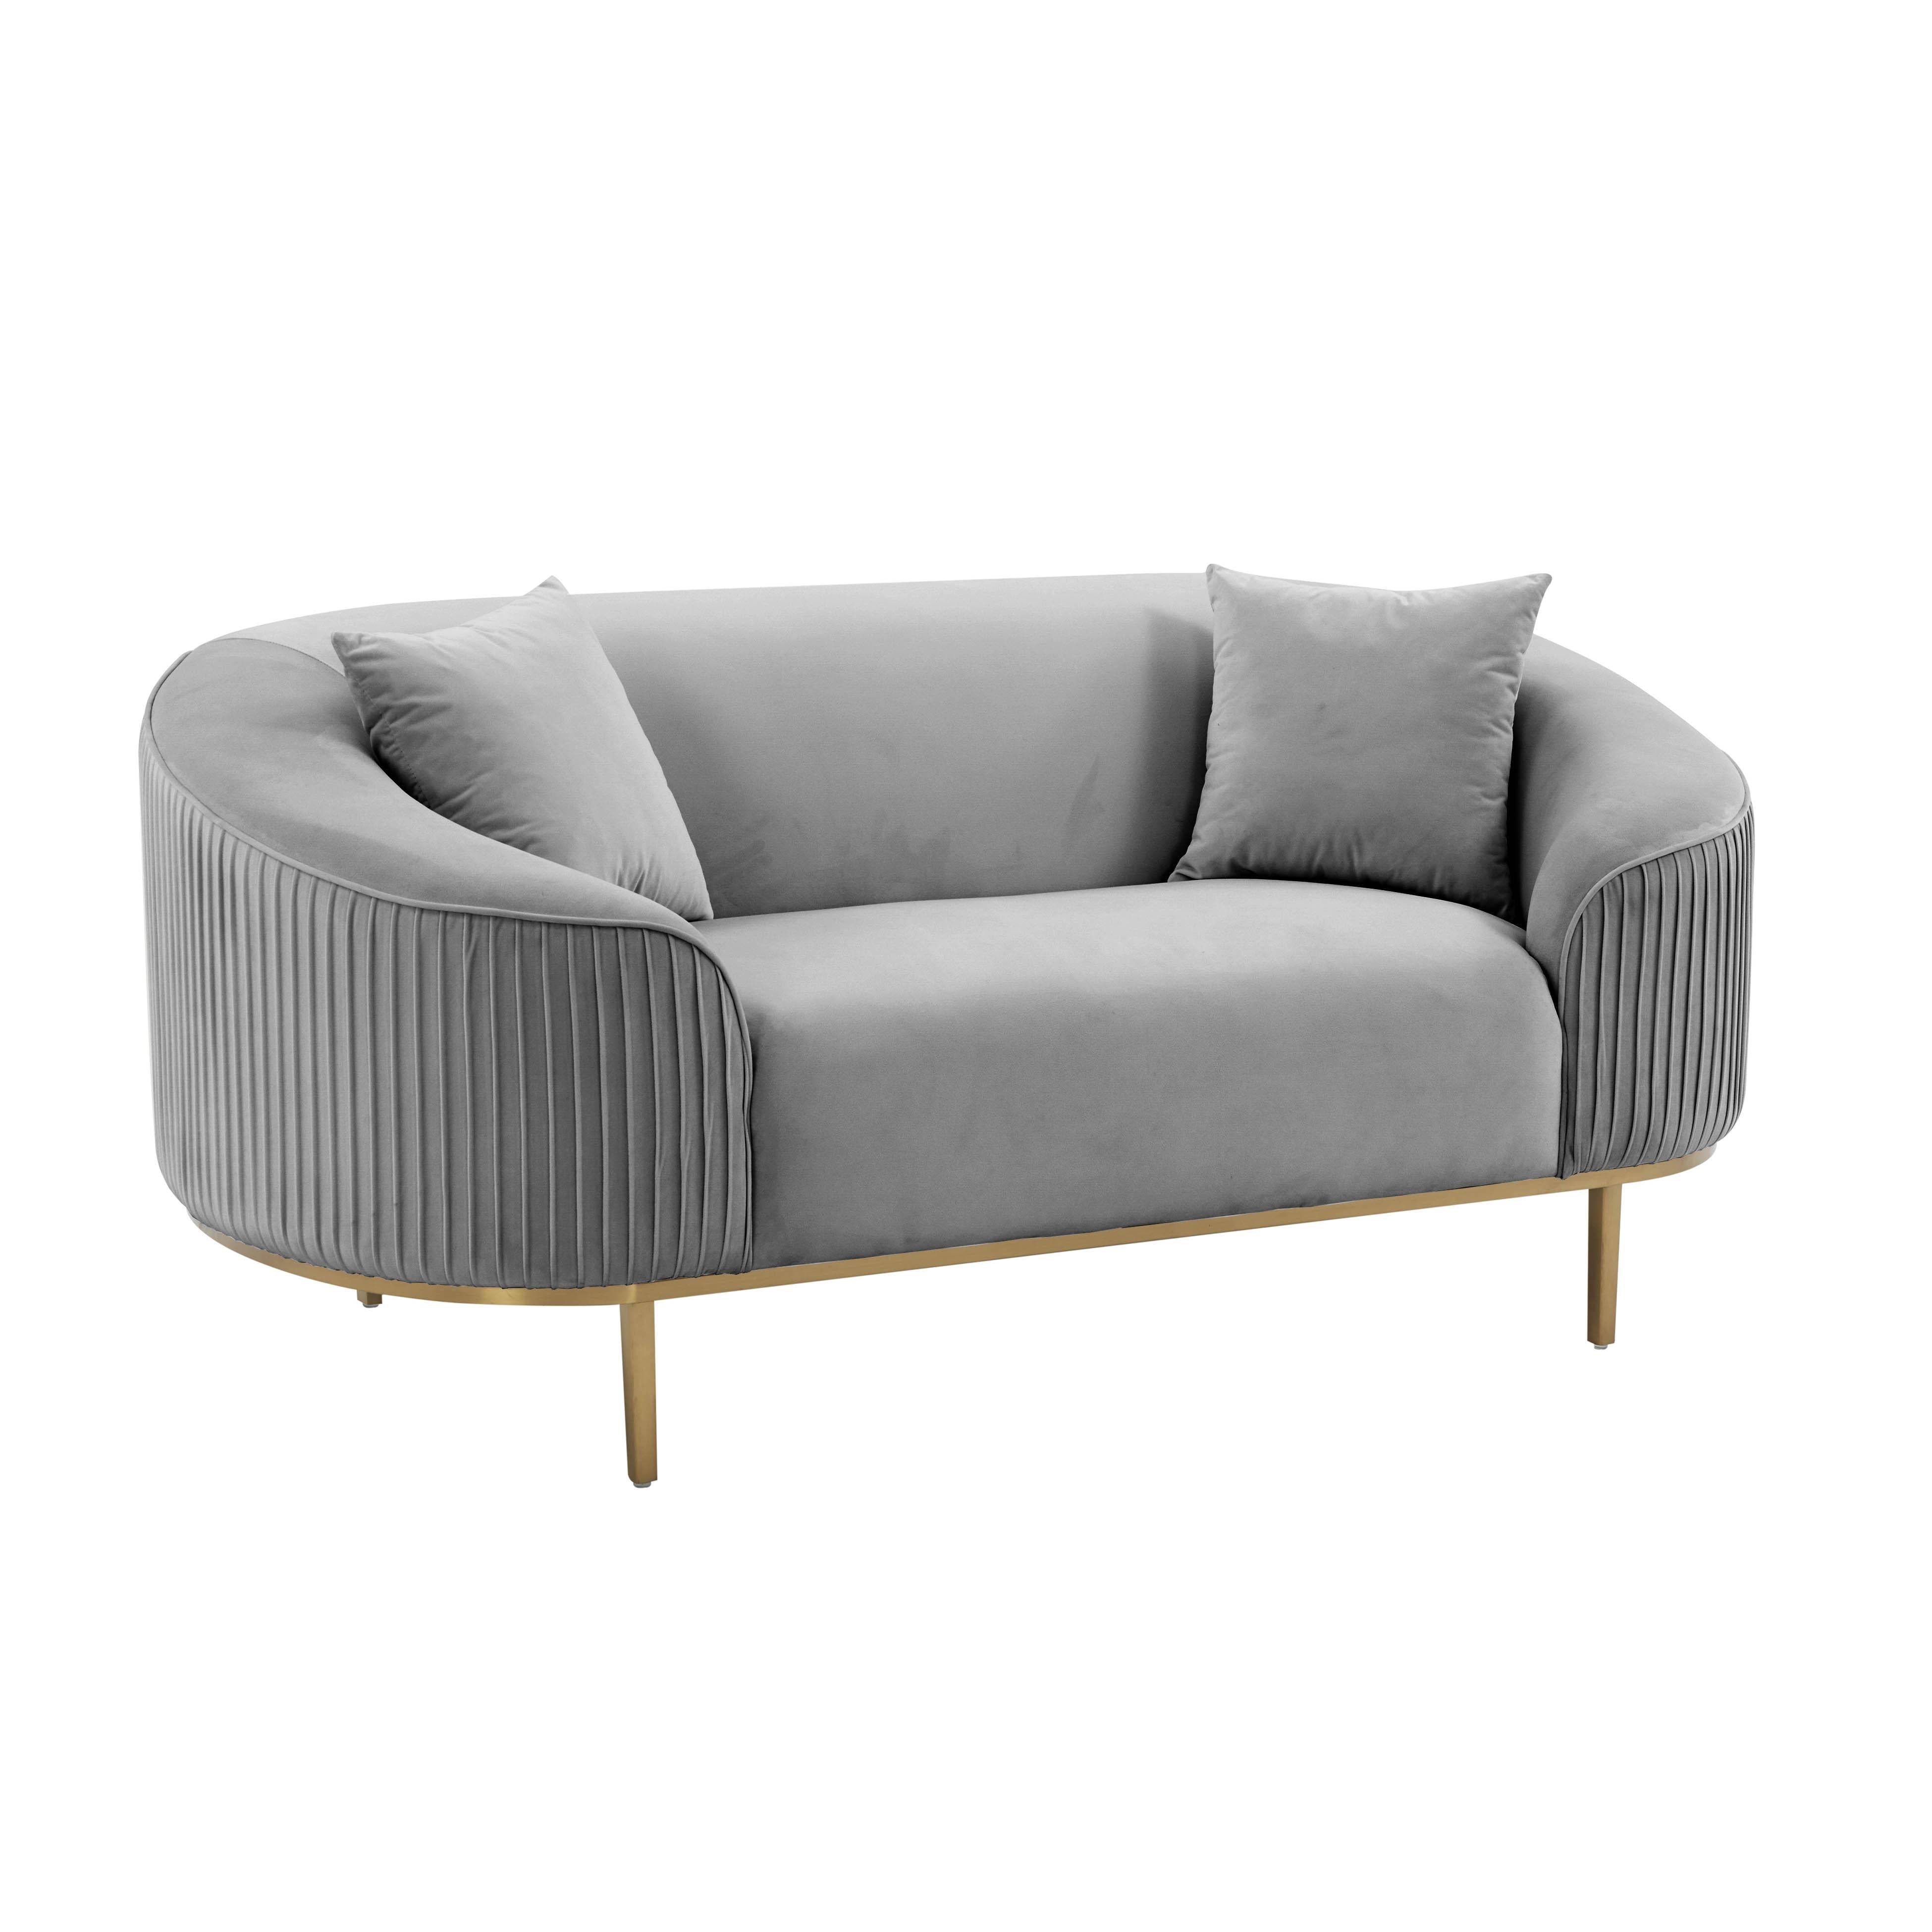 Create a Cozy and | our with Atmosphere Inviting Loveseats CasaOne